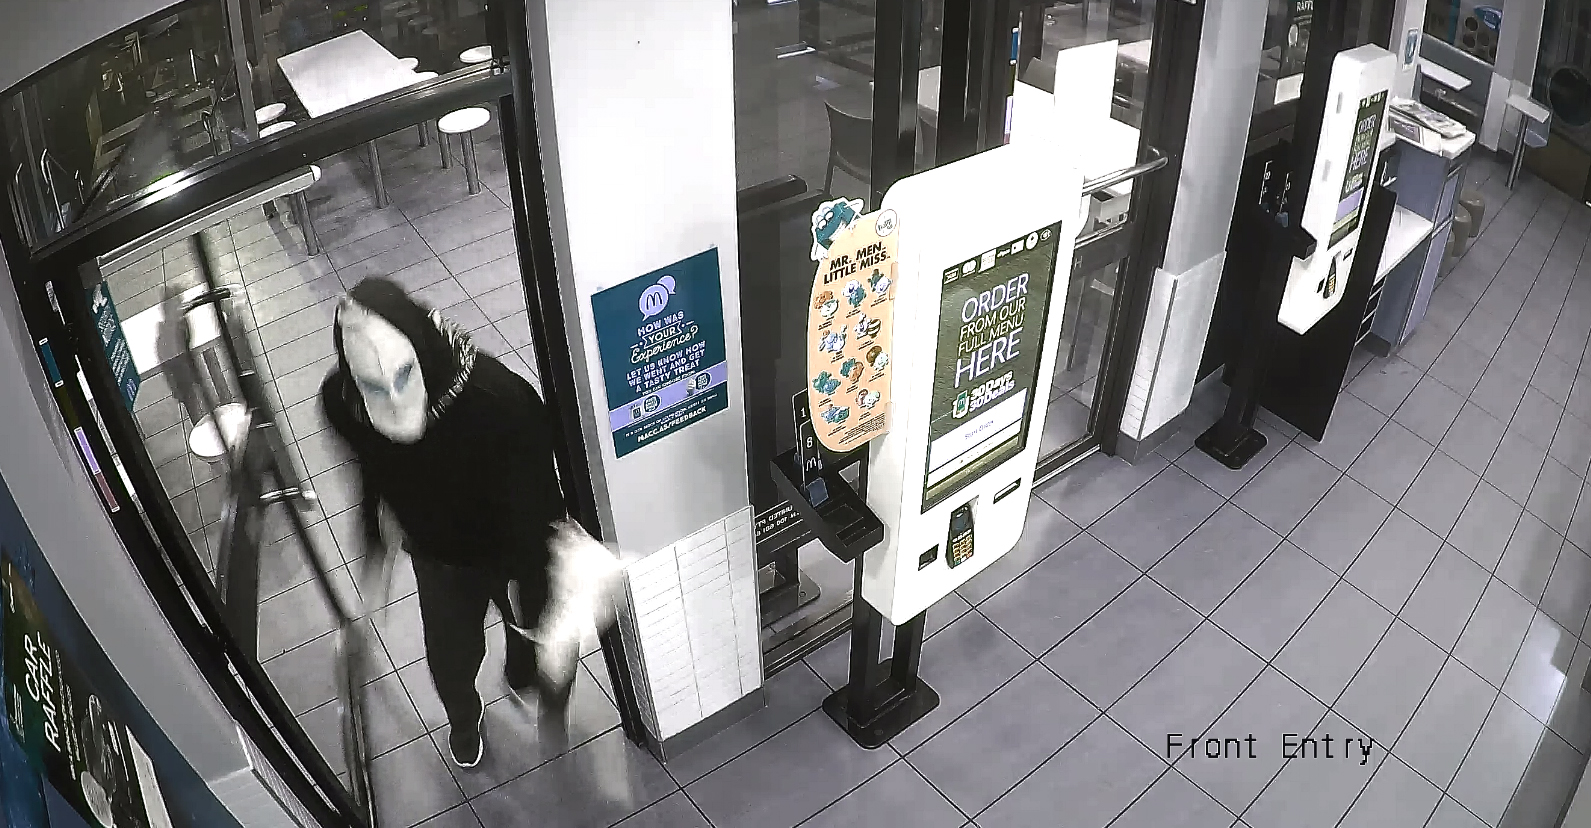 Police release CCTV images of masked man wanted on McDonalds aggravated robbery charges